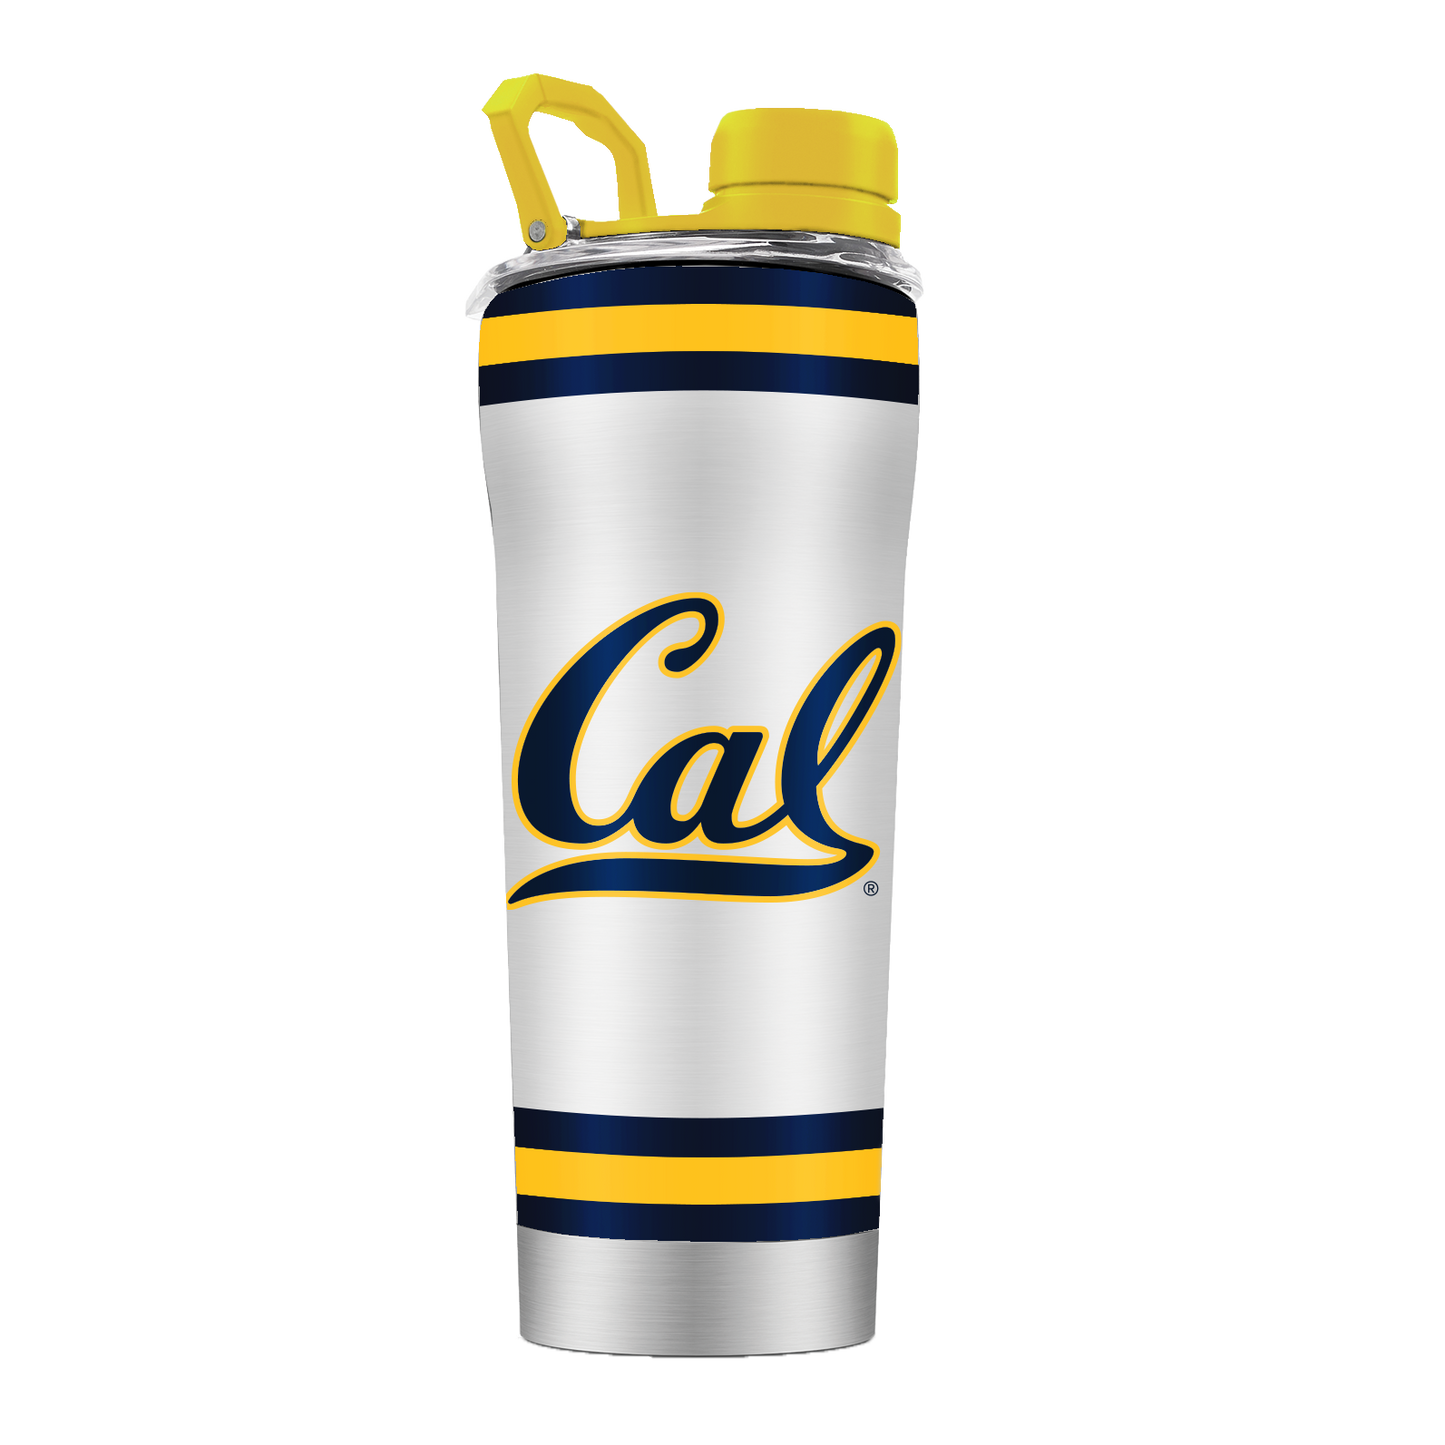 U.C. Berkeley Cal 20 oz. Stainless Steel shaker with shaker ball 20 oz.-White-Shop College Wear